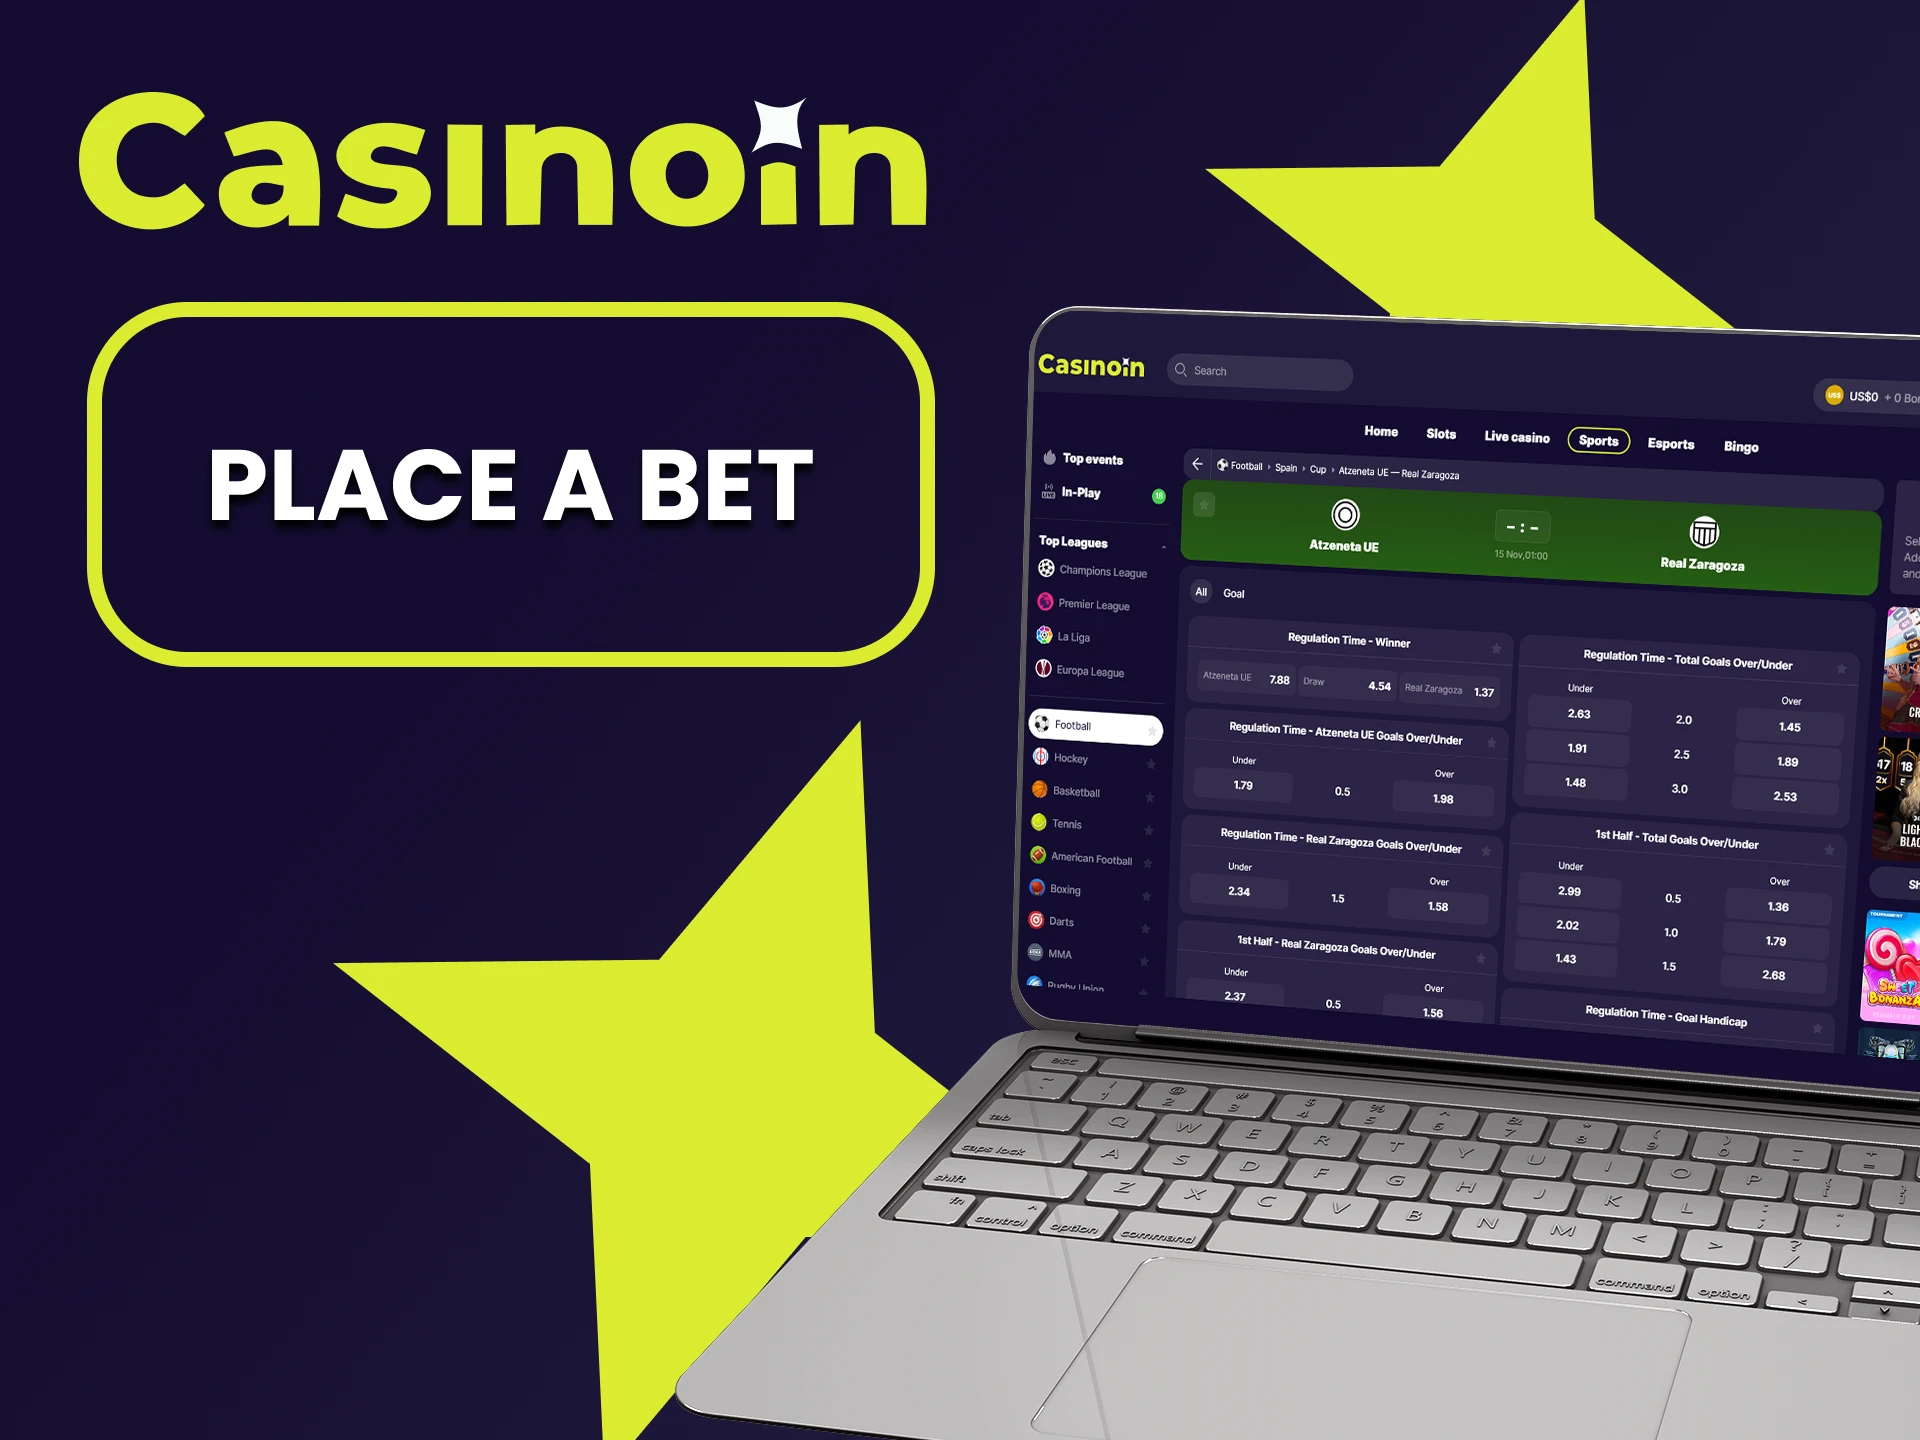 We will tell you how to bet on sports with Casinoin.